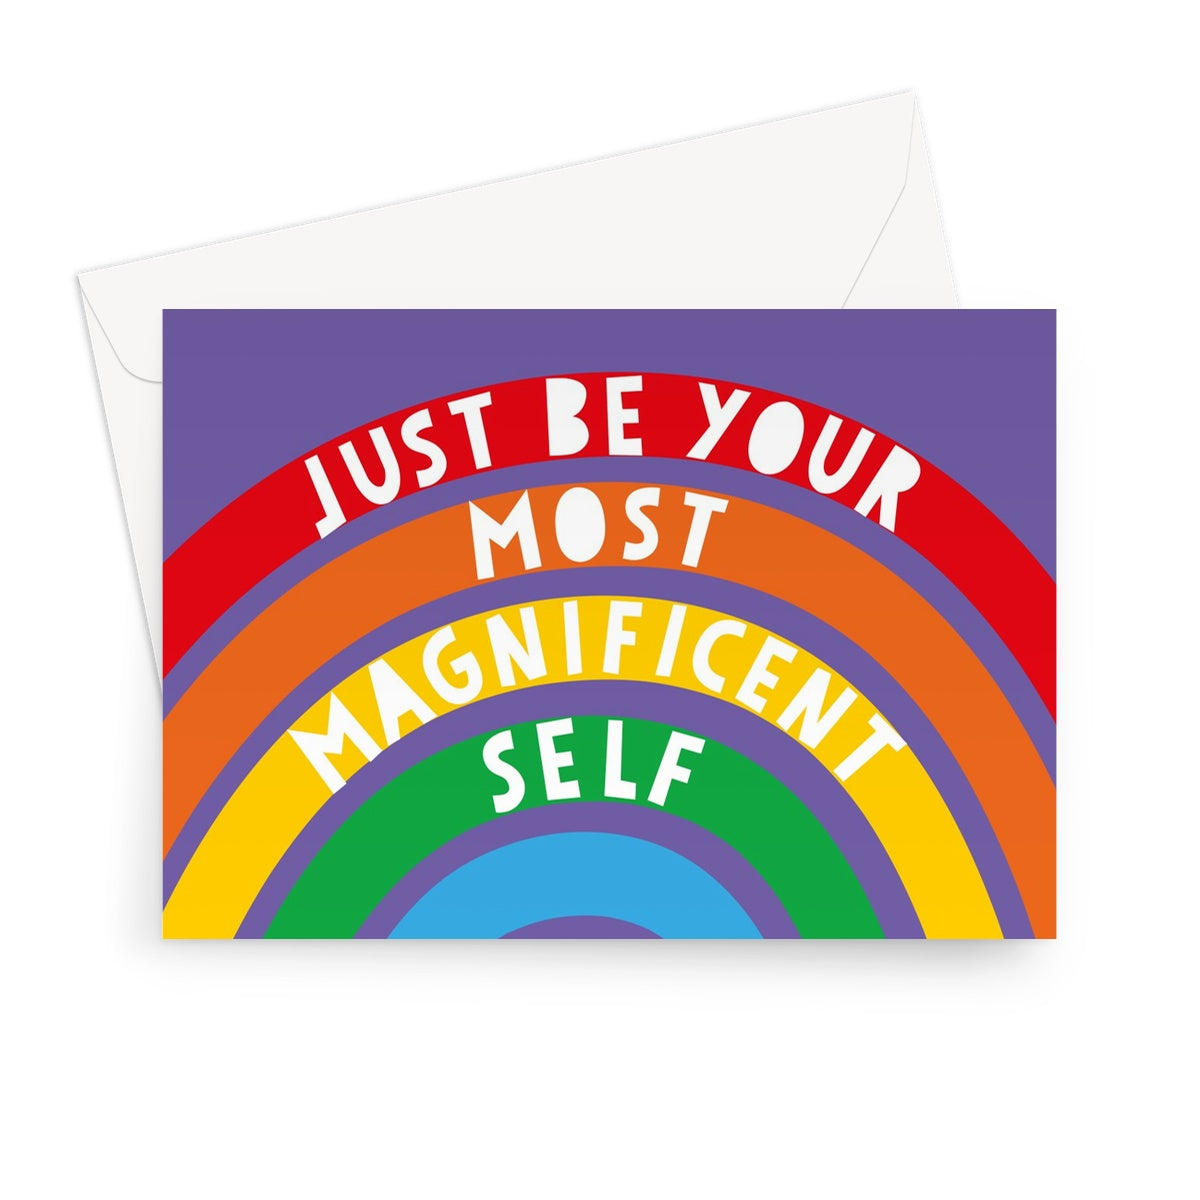 Just Be Your Most Magnificent Self Greeting Card